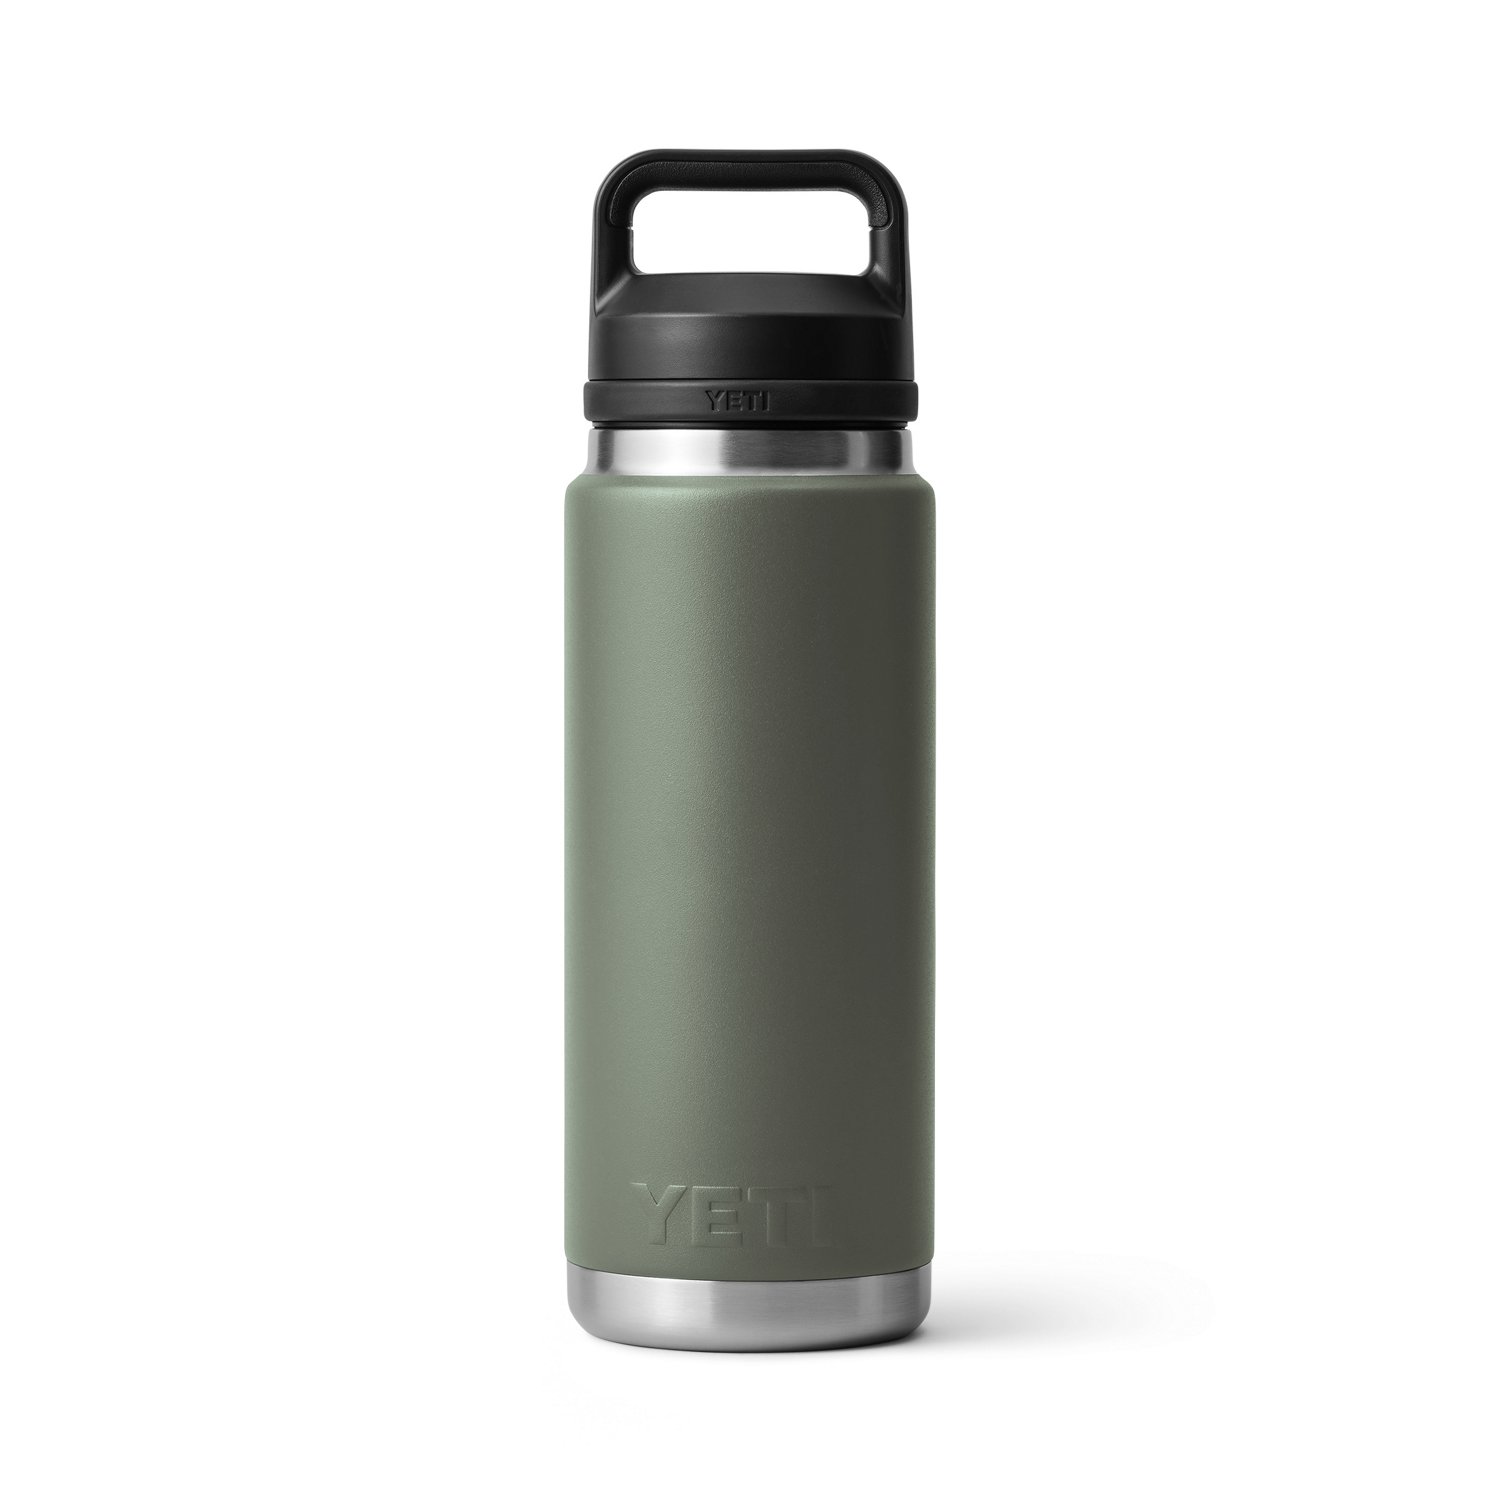 TiciKim Chug Cap for YETI Rambler Bottle Fits for 18 oz 26 oz 36 oz 64 oz  Chug Replacement Lid Cap Water Bottle Accessories Compatible with Yeti